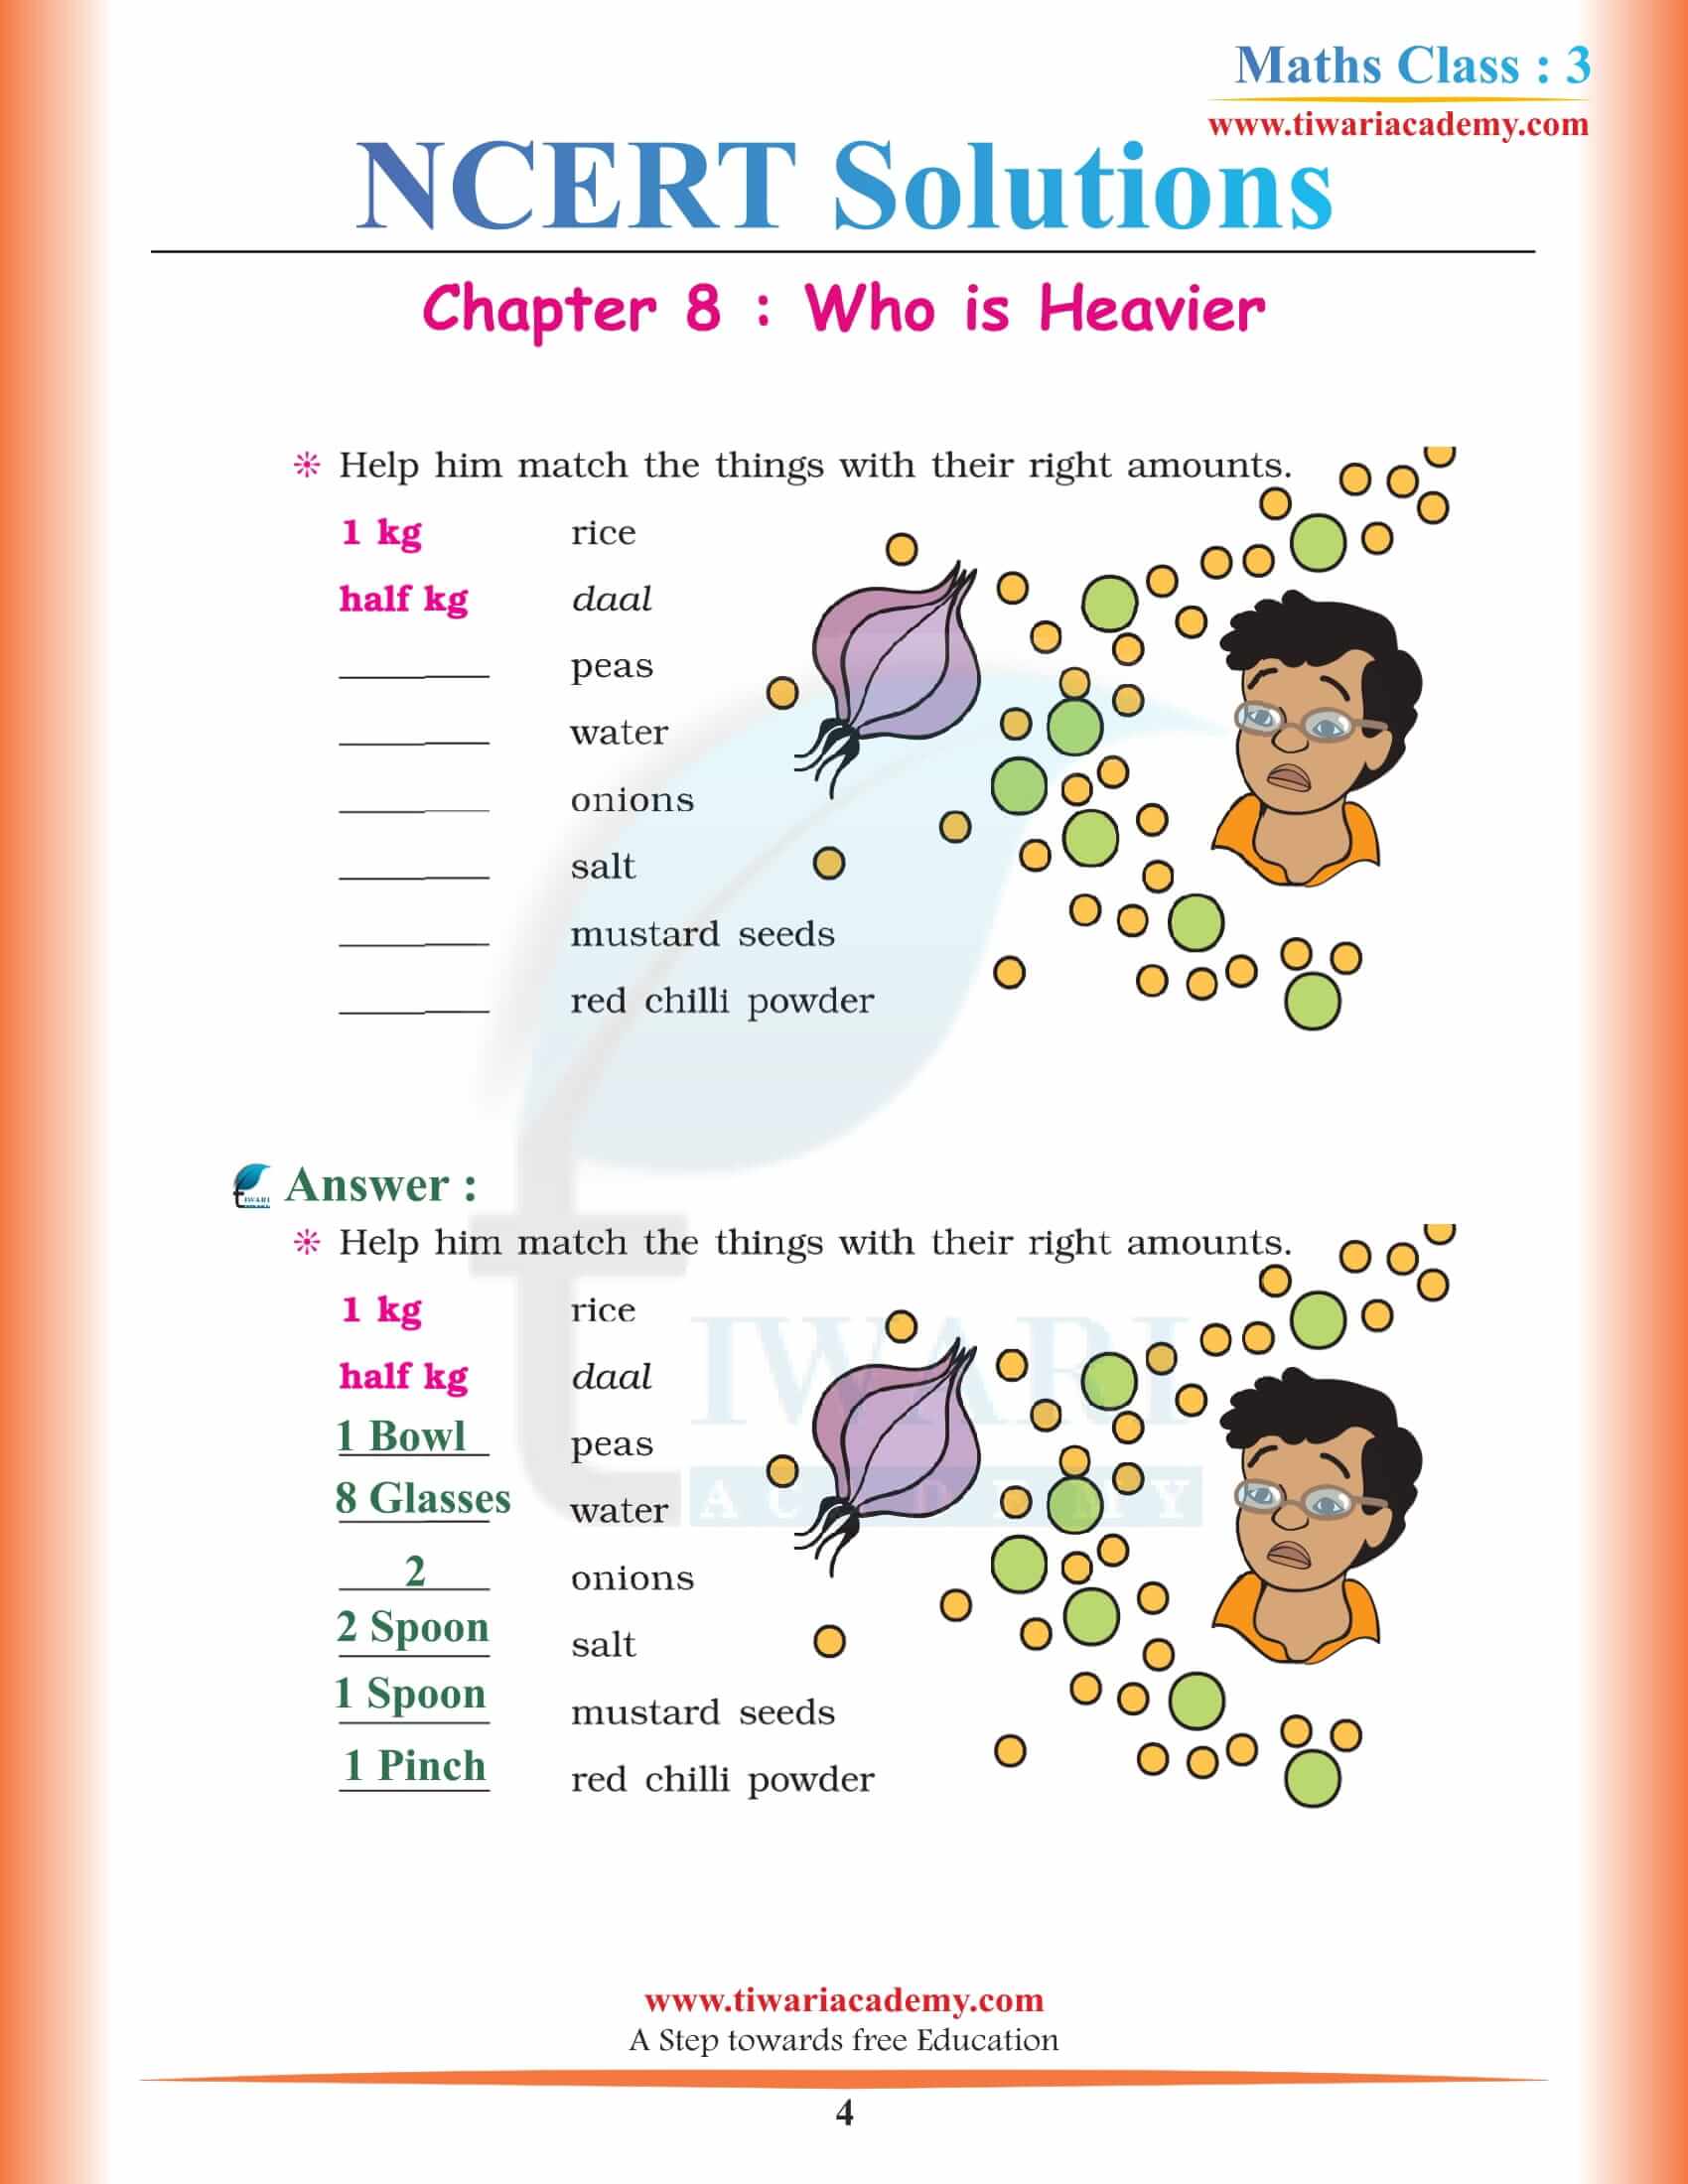 NCERT Solutions for Class 3 Maths Chapter 8 in English Medium